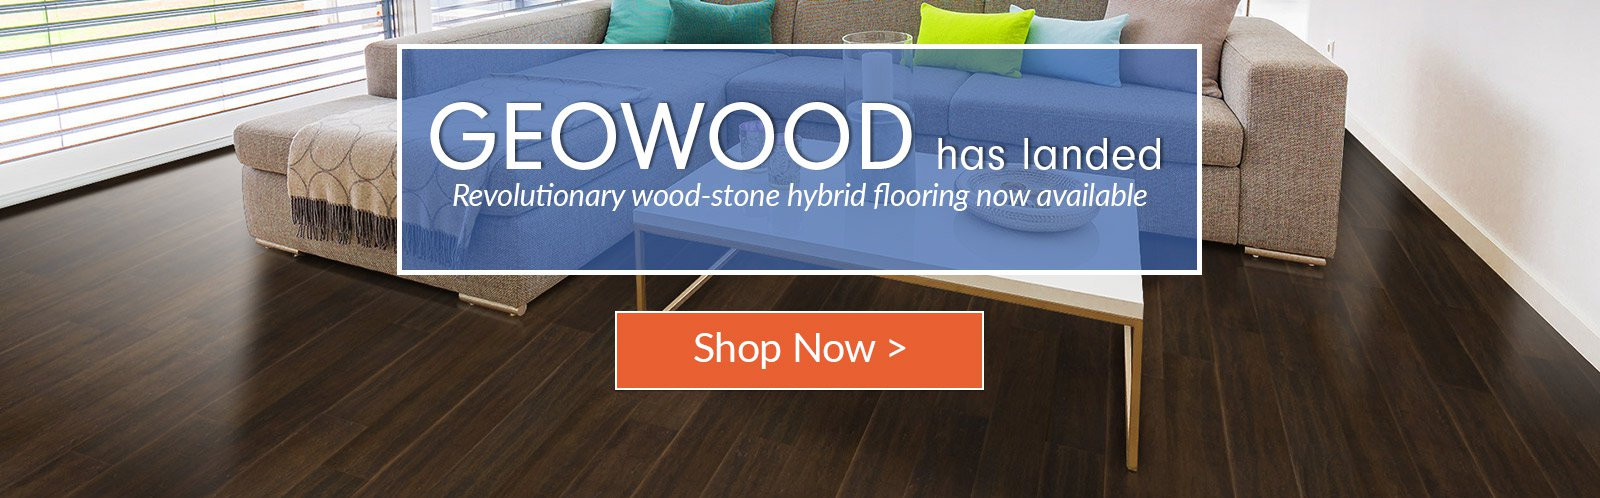 24 Ideal Hardwood Floor Suppliers Denver 2024 free download hardwood floor suppliers denver of green building construction materials and home decor cali bamboo intended for geowood launch homepage slider